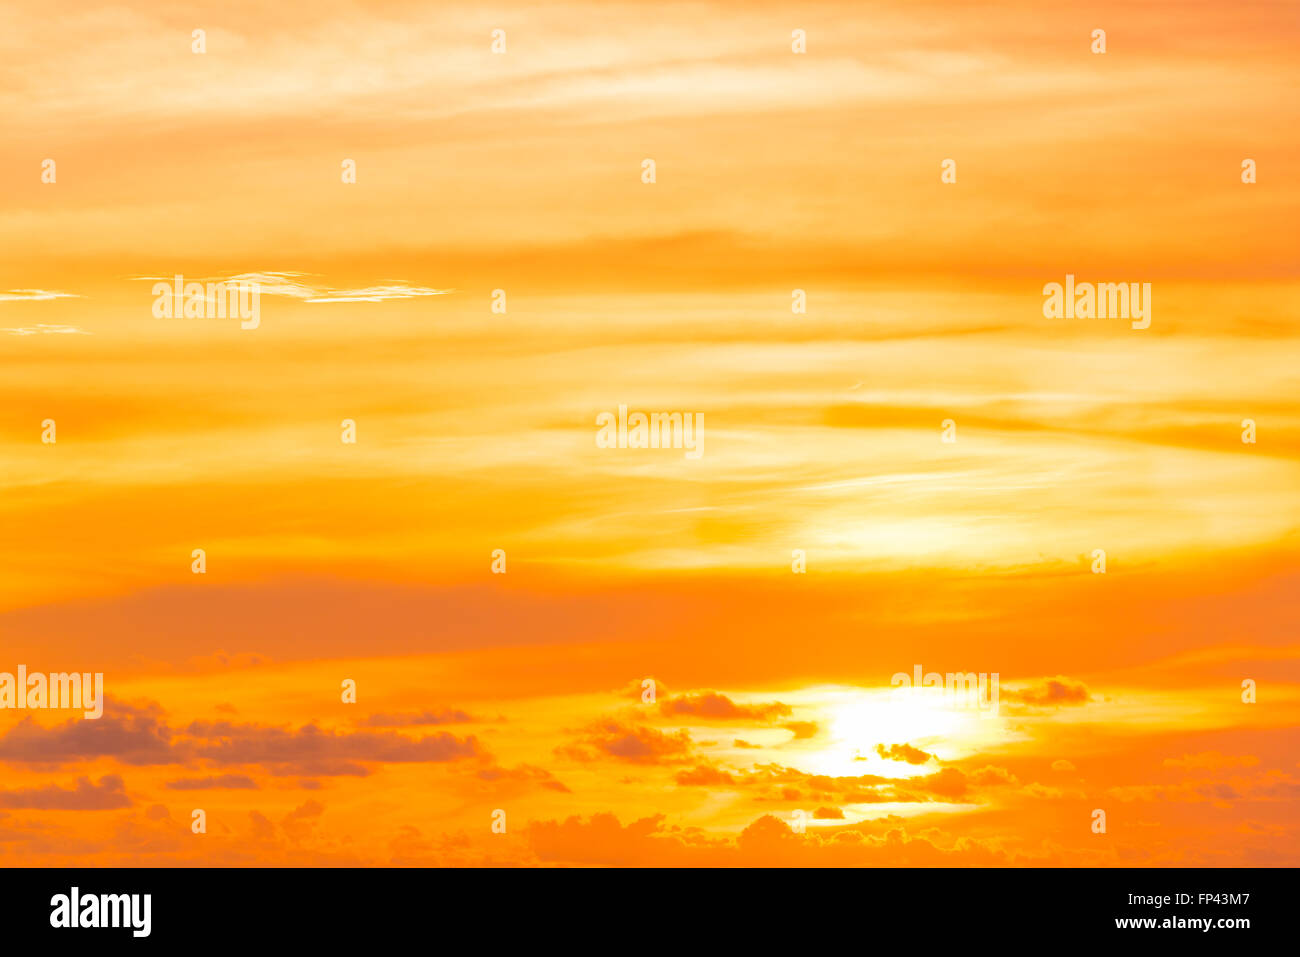 Sunset / sunrise orange sky with clouds, light rays and other atmospheric effect. Stock Photo